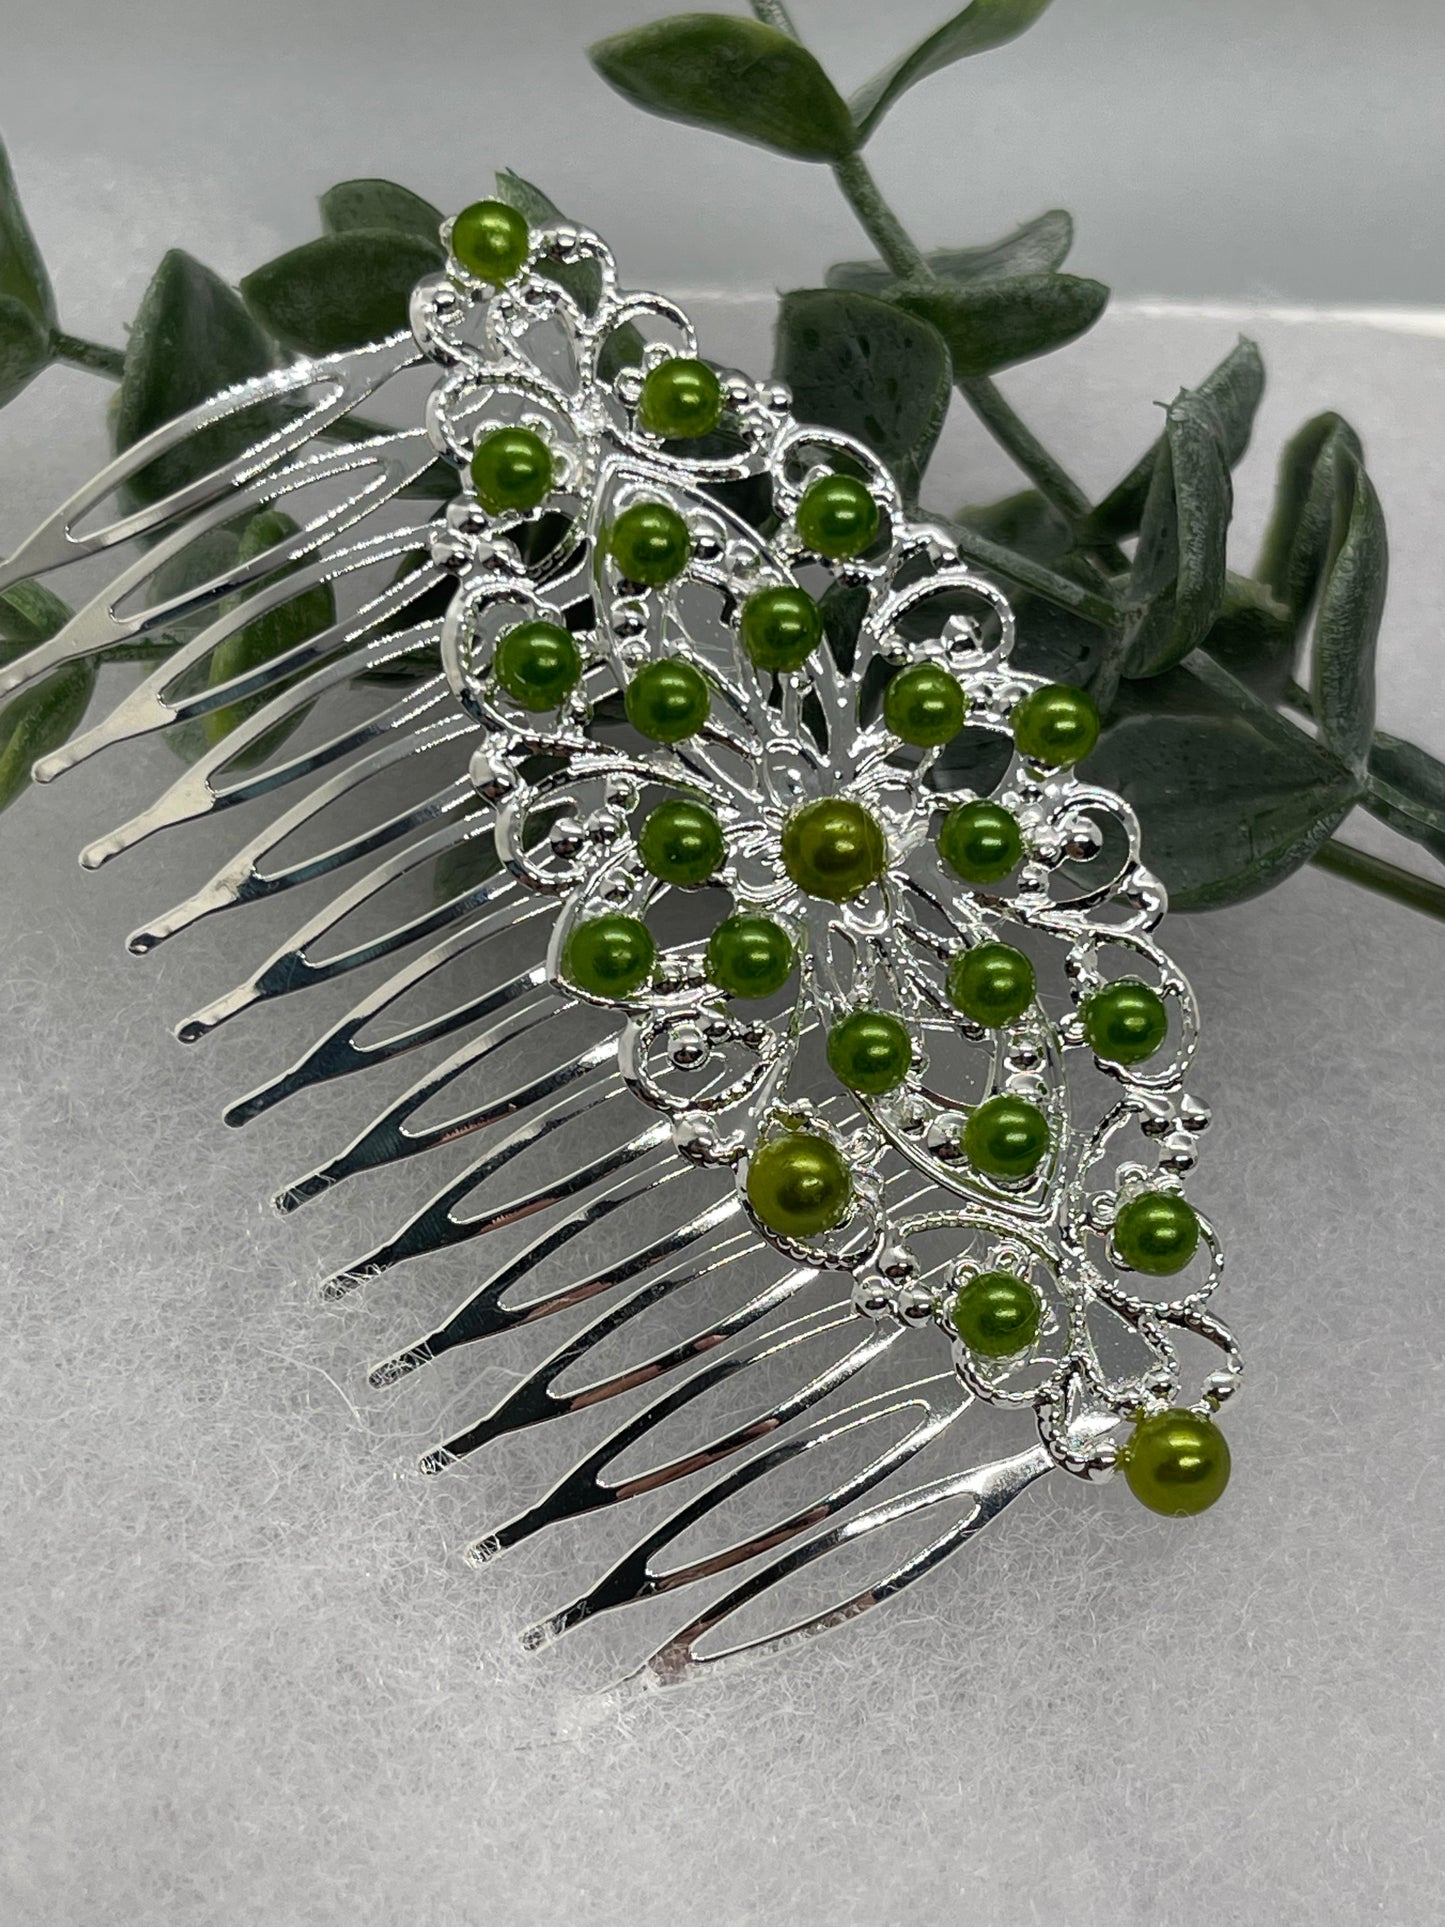 Green Pearl 3.5” side Comb silver Antique vintage style bridal Wedding shower sweet 16 birthday princess bridesmaid hair accessory